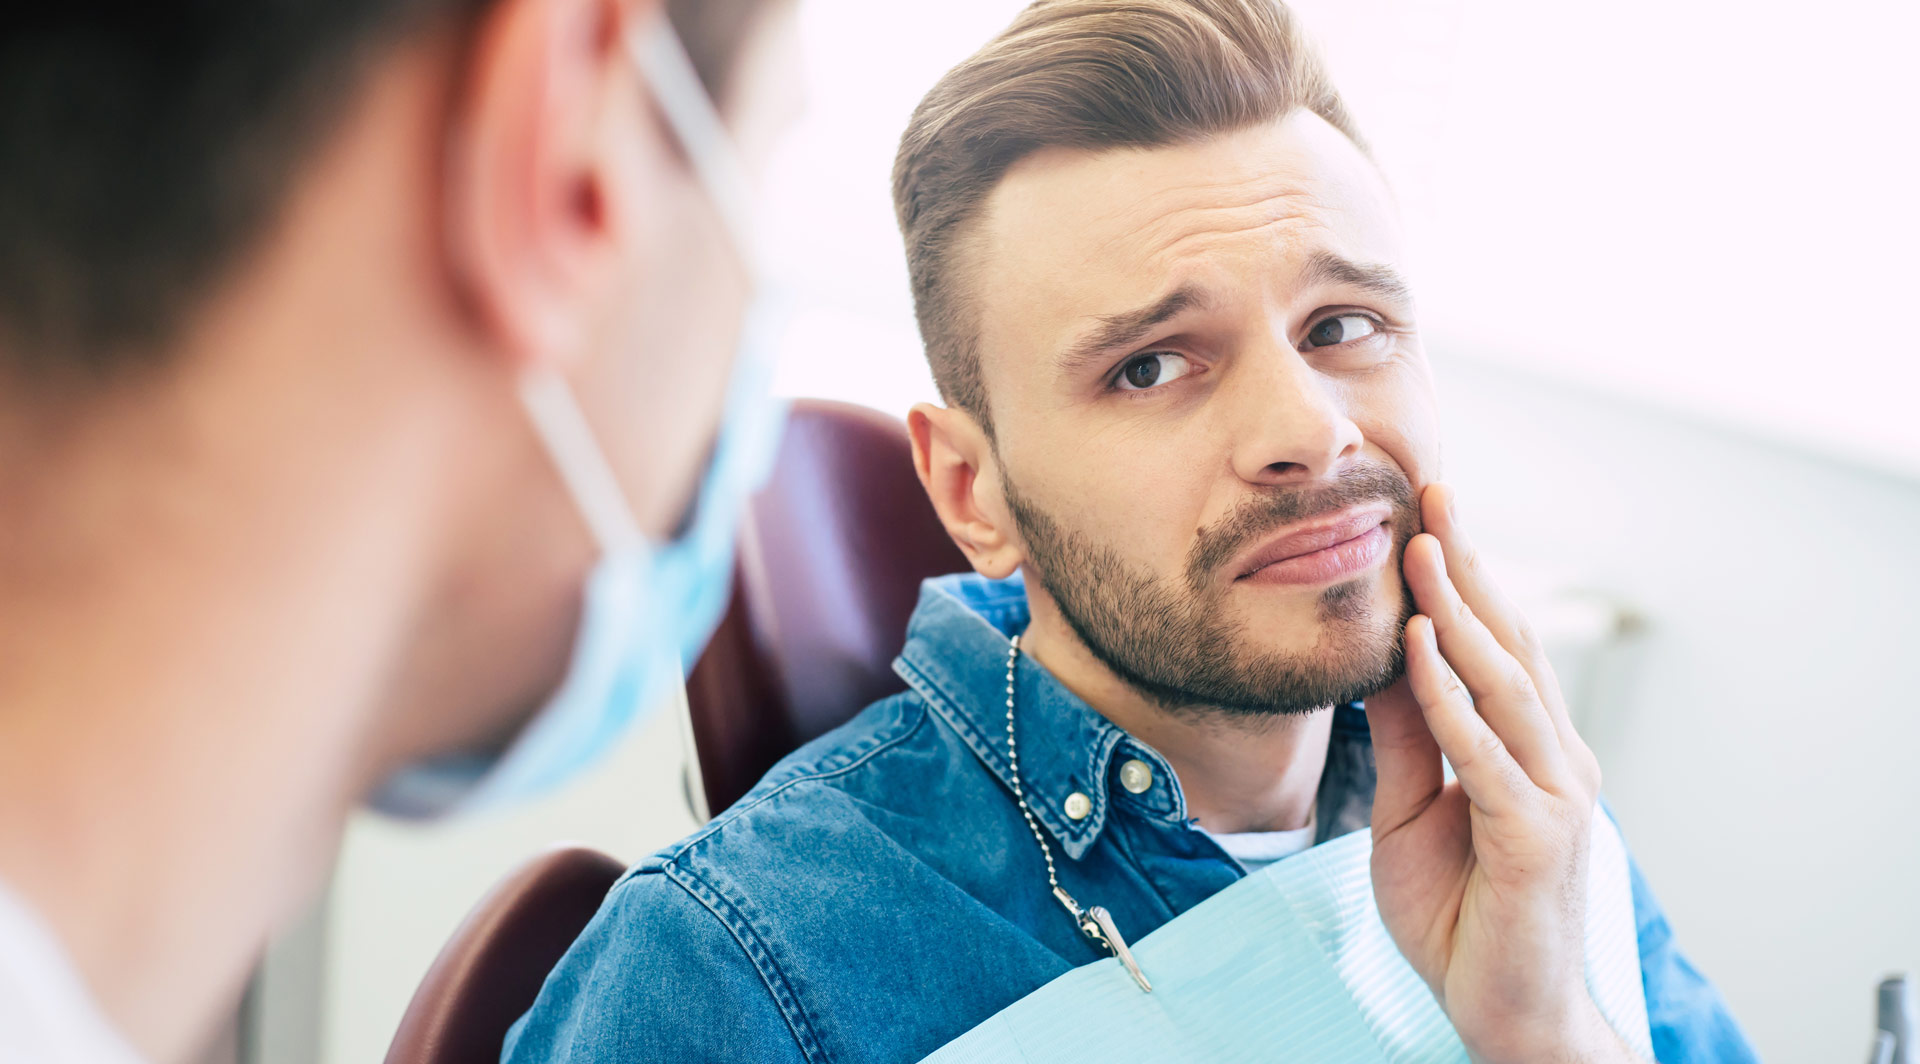 Why dental treatments should always be booked with your UK dentist